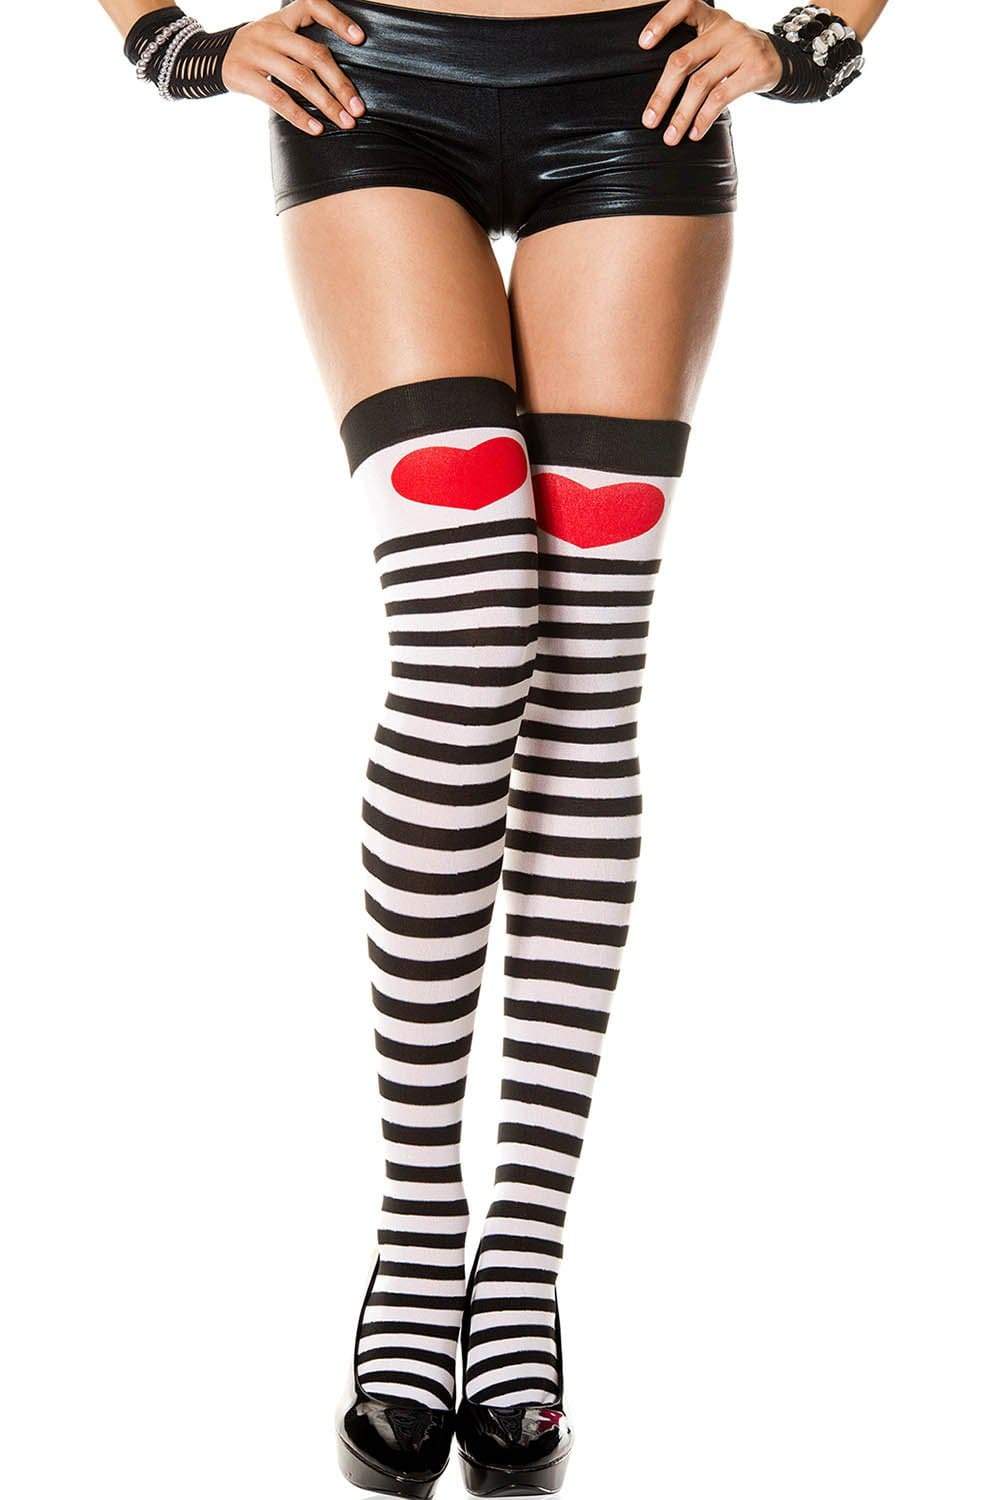 SoHot Clubwear Print / One Size Black &amp; White Stripe w/ Red Heart Thigh High Stockings SHC-6315-LA Harlequin &amp; Heart Thigh High Costume Stockings | Leg Avenue 6315 Apparel &amp; Accessories &gt; Clothing &gt; Pants